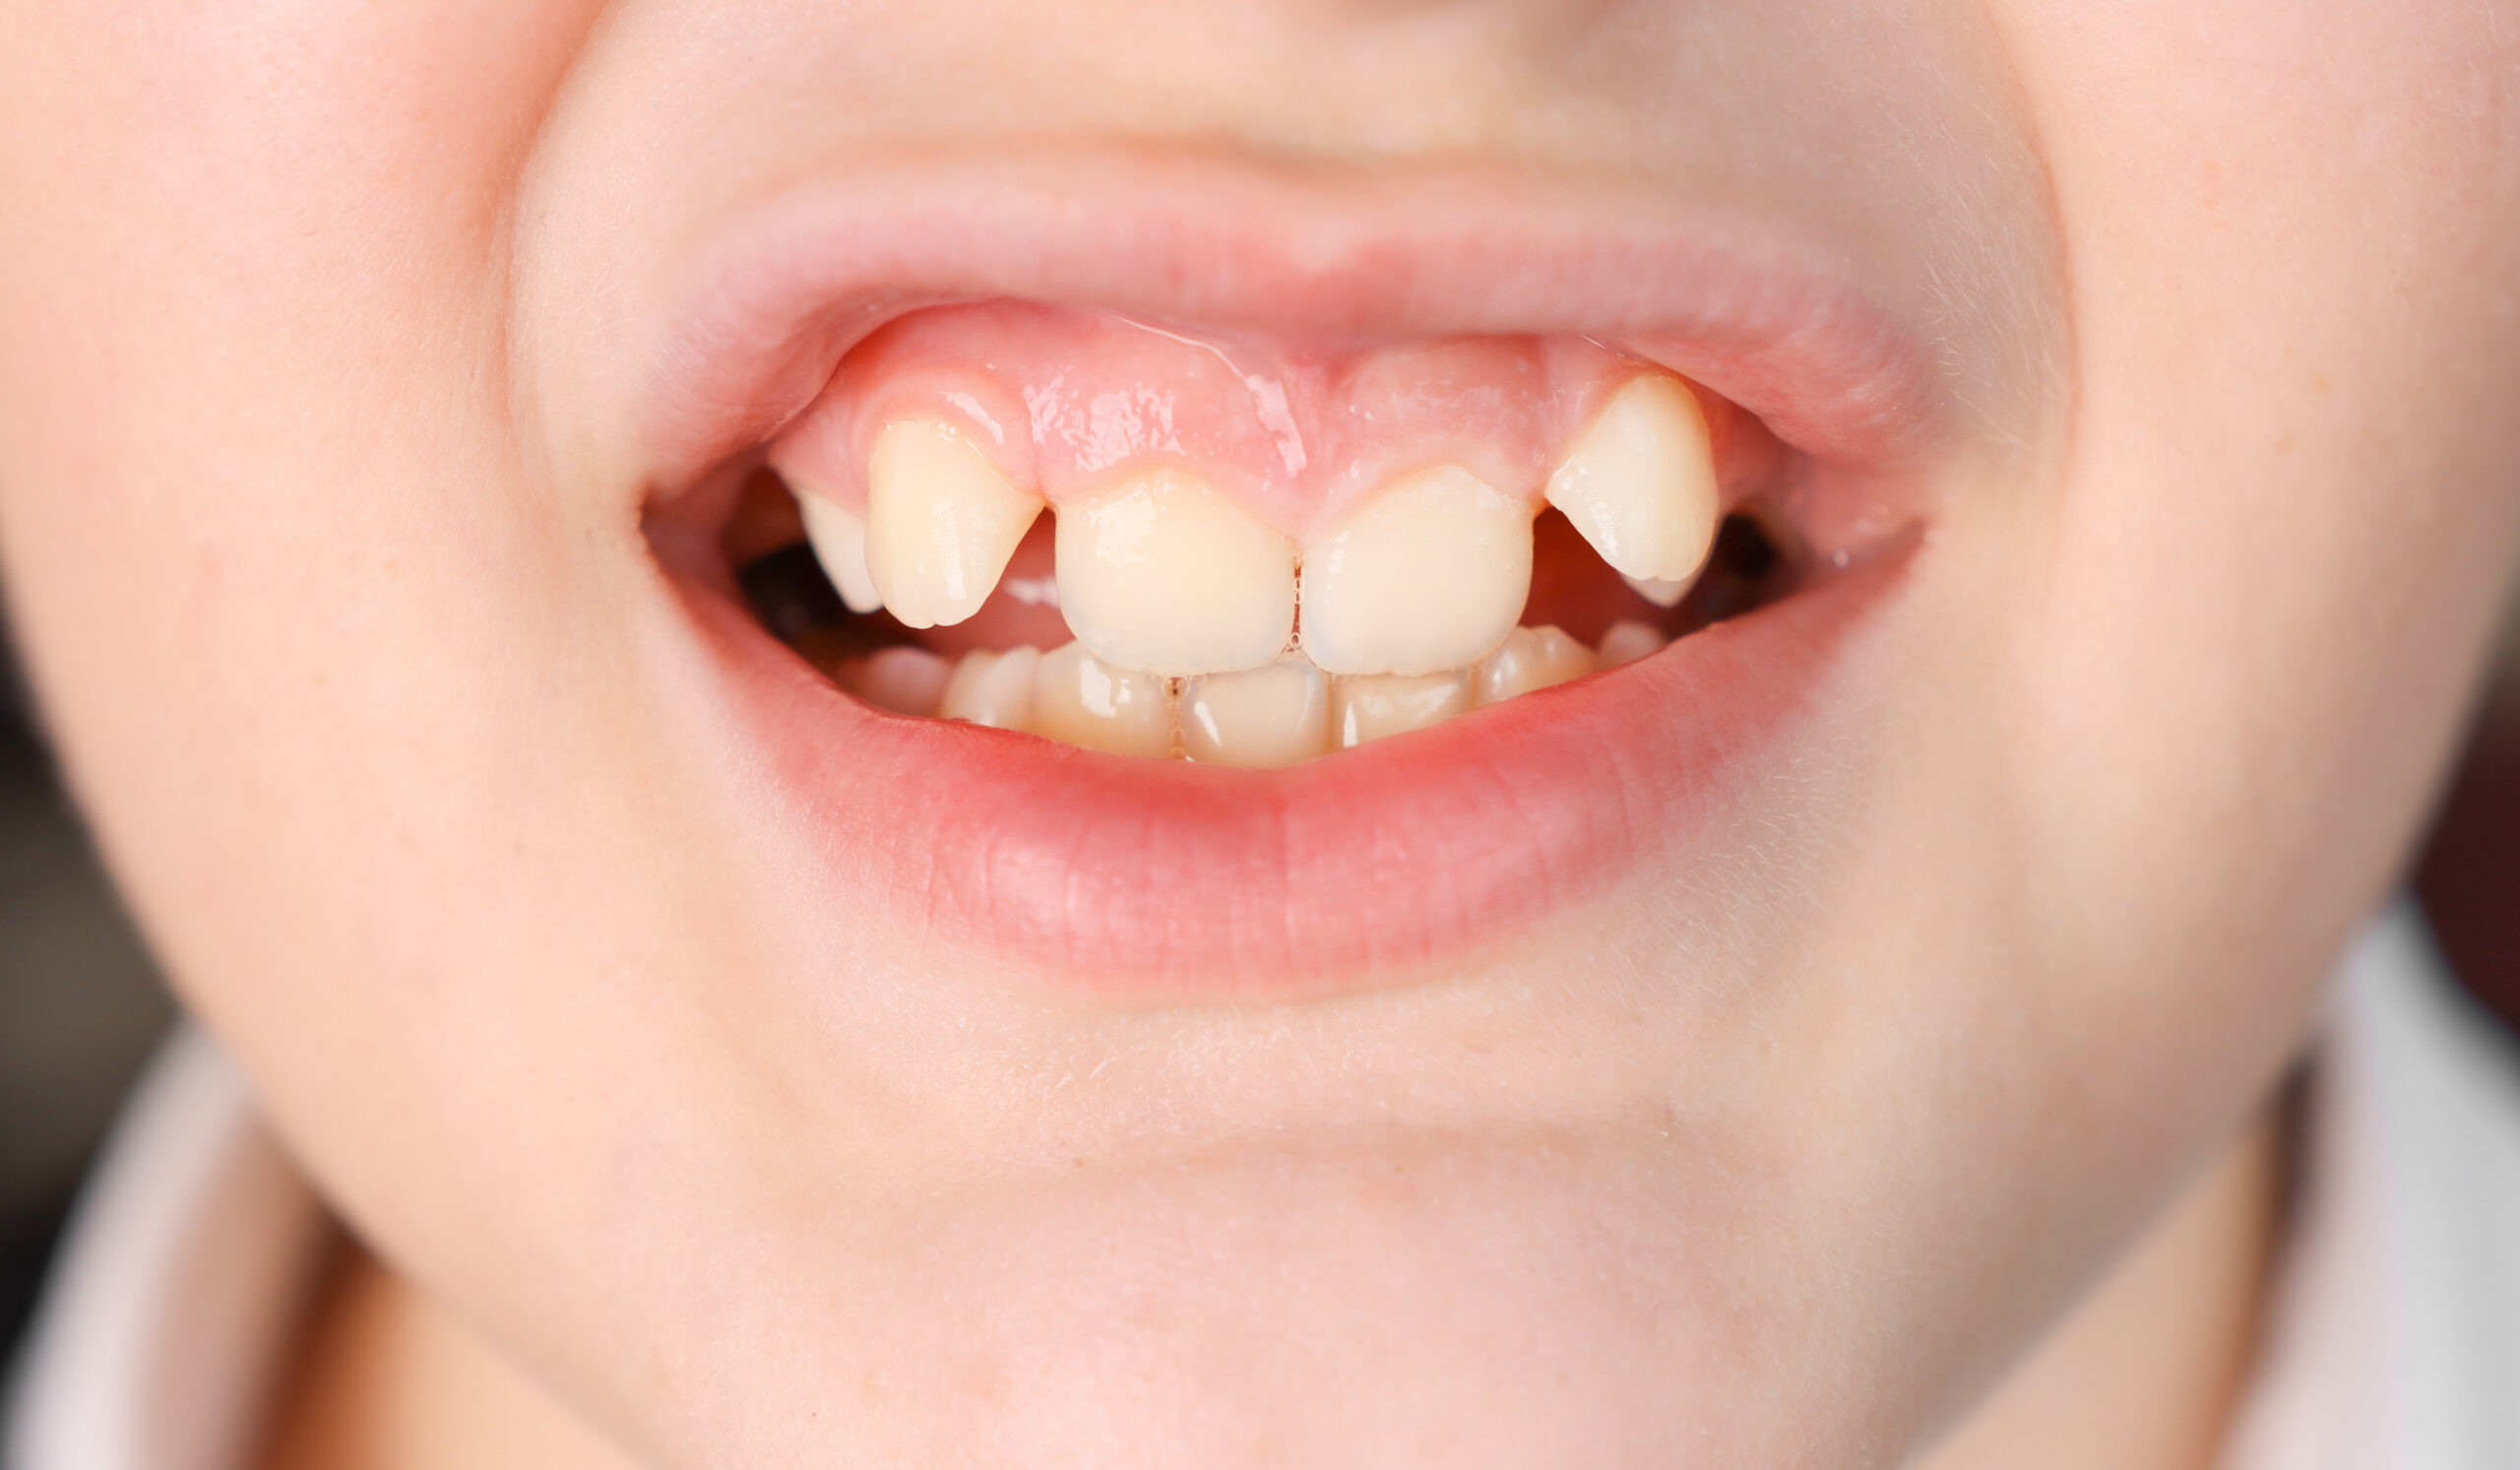 Close-up of a child's mouth with malpositioned teeth.